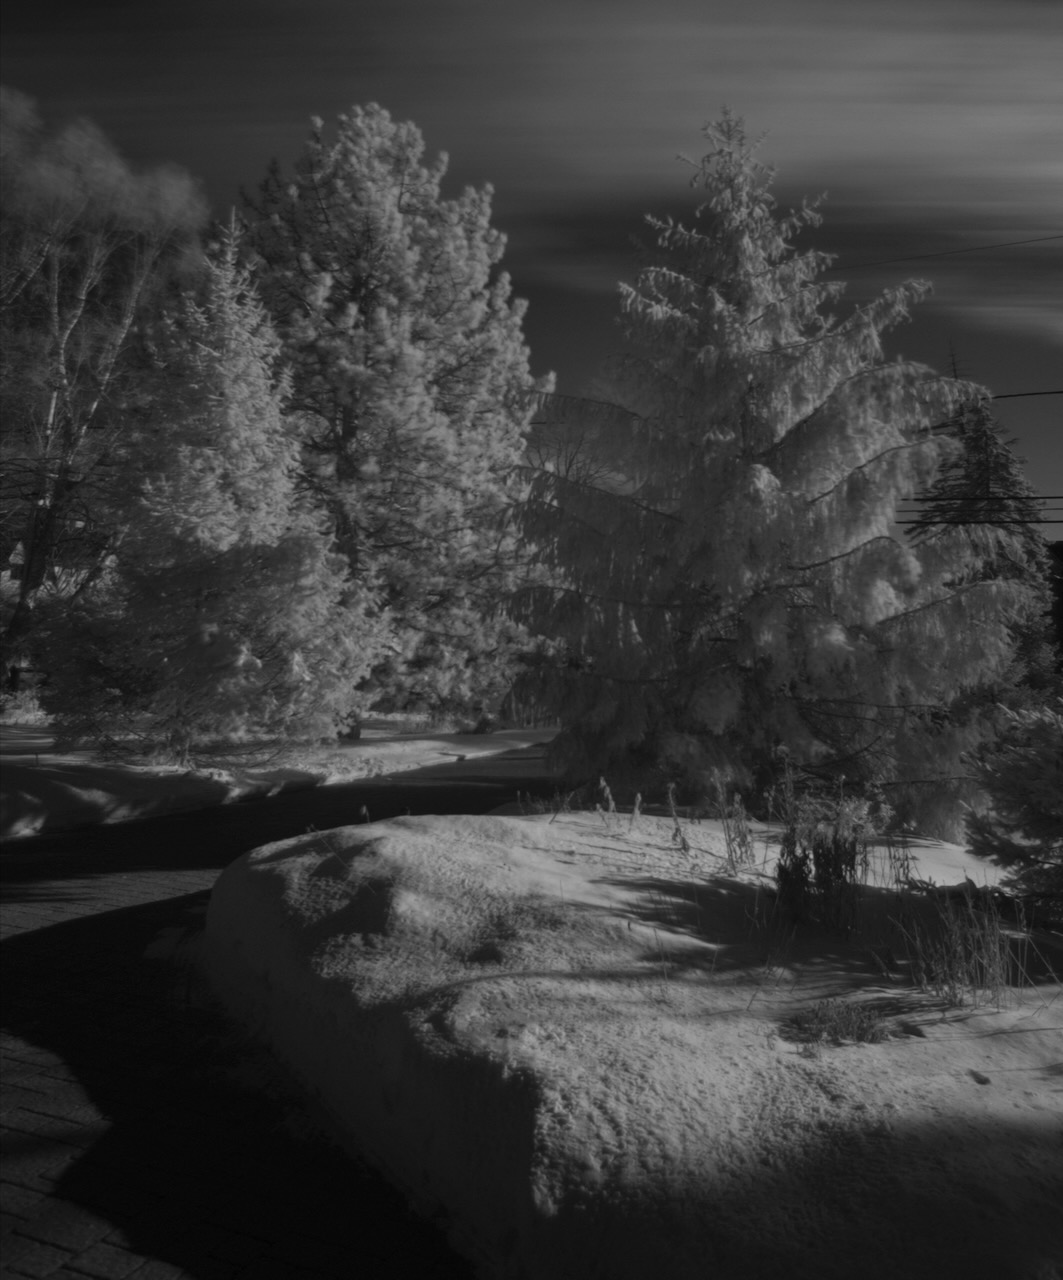 Get an Infrared Filter to create snow